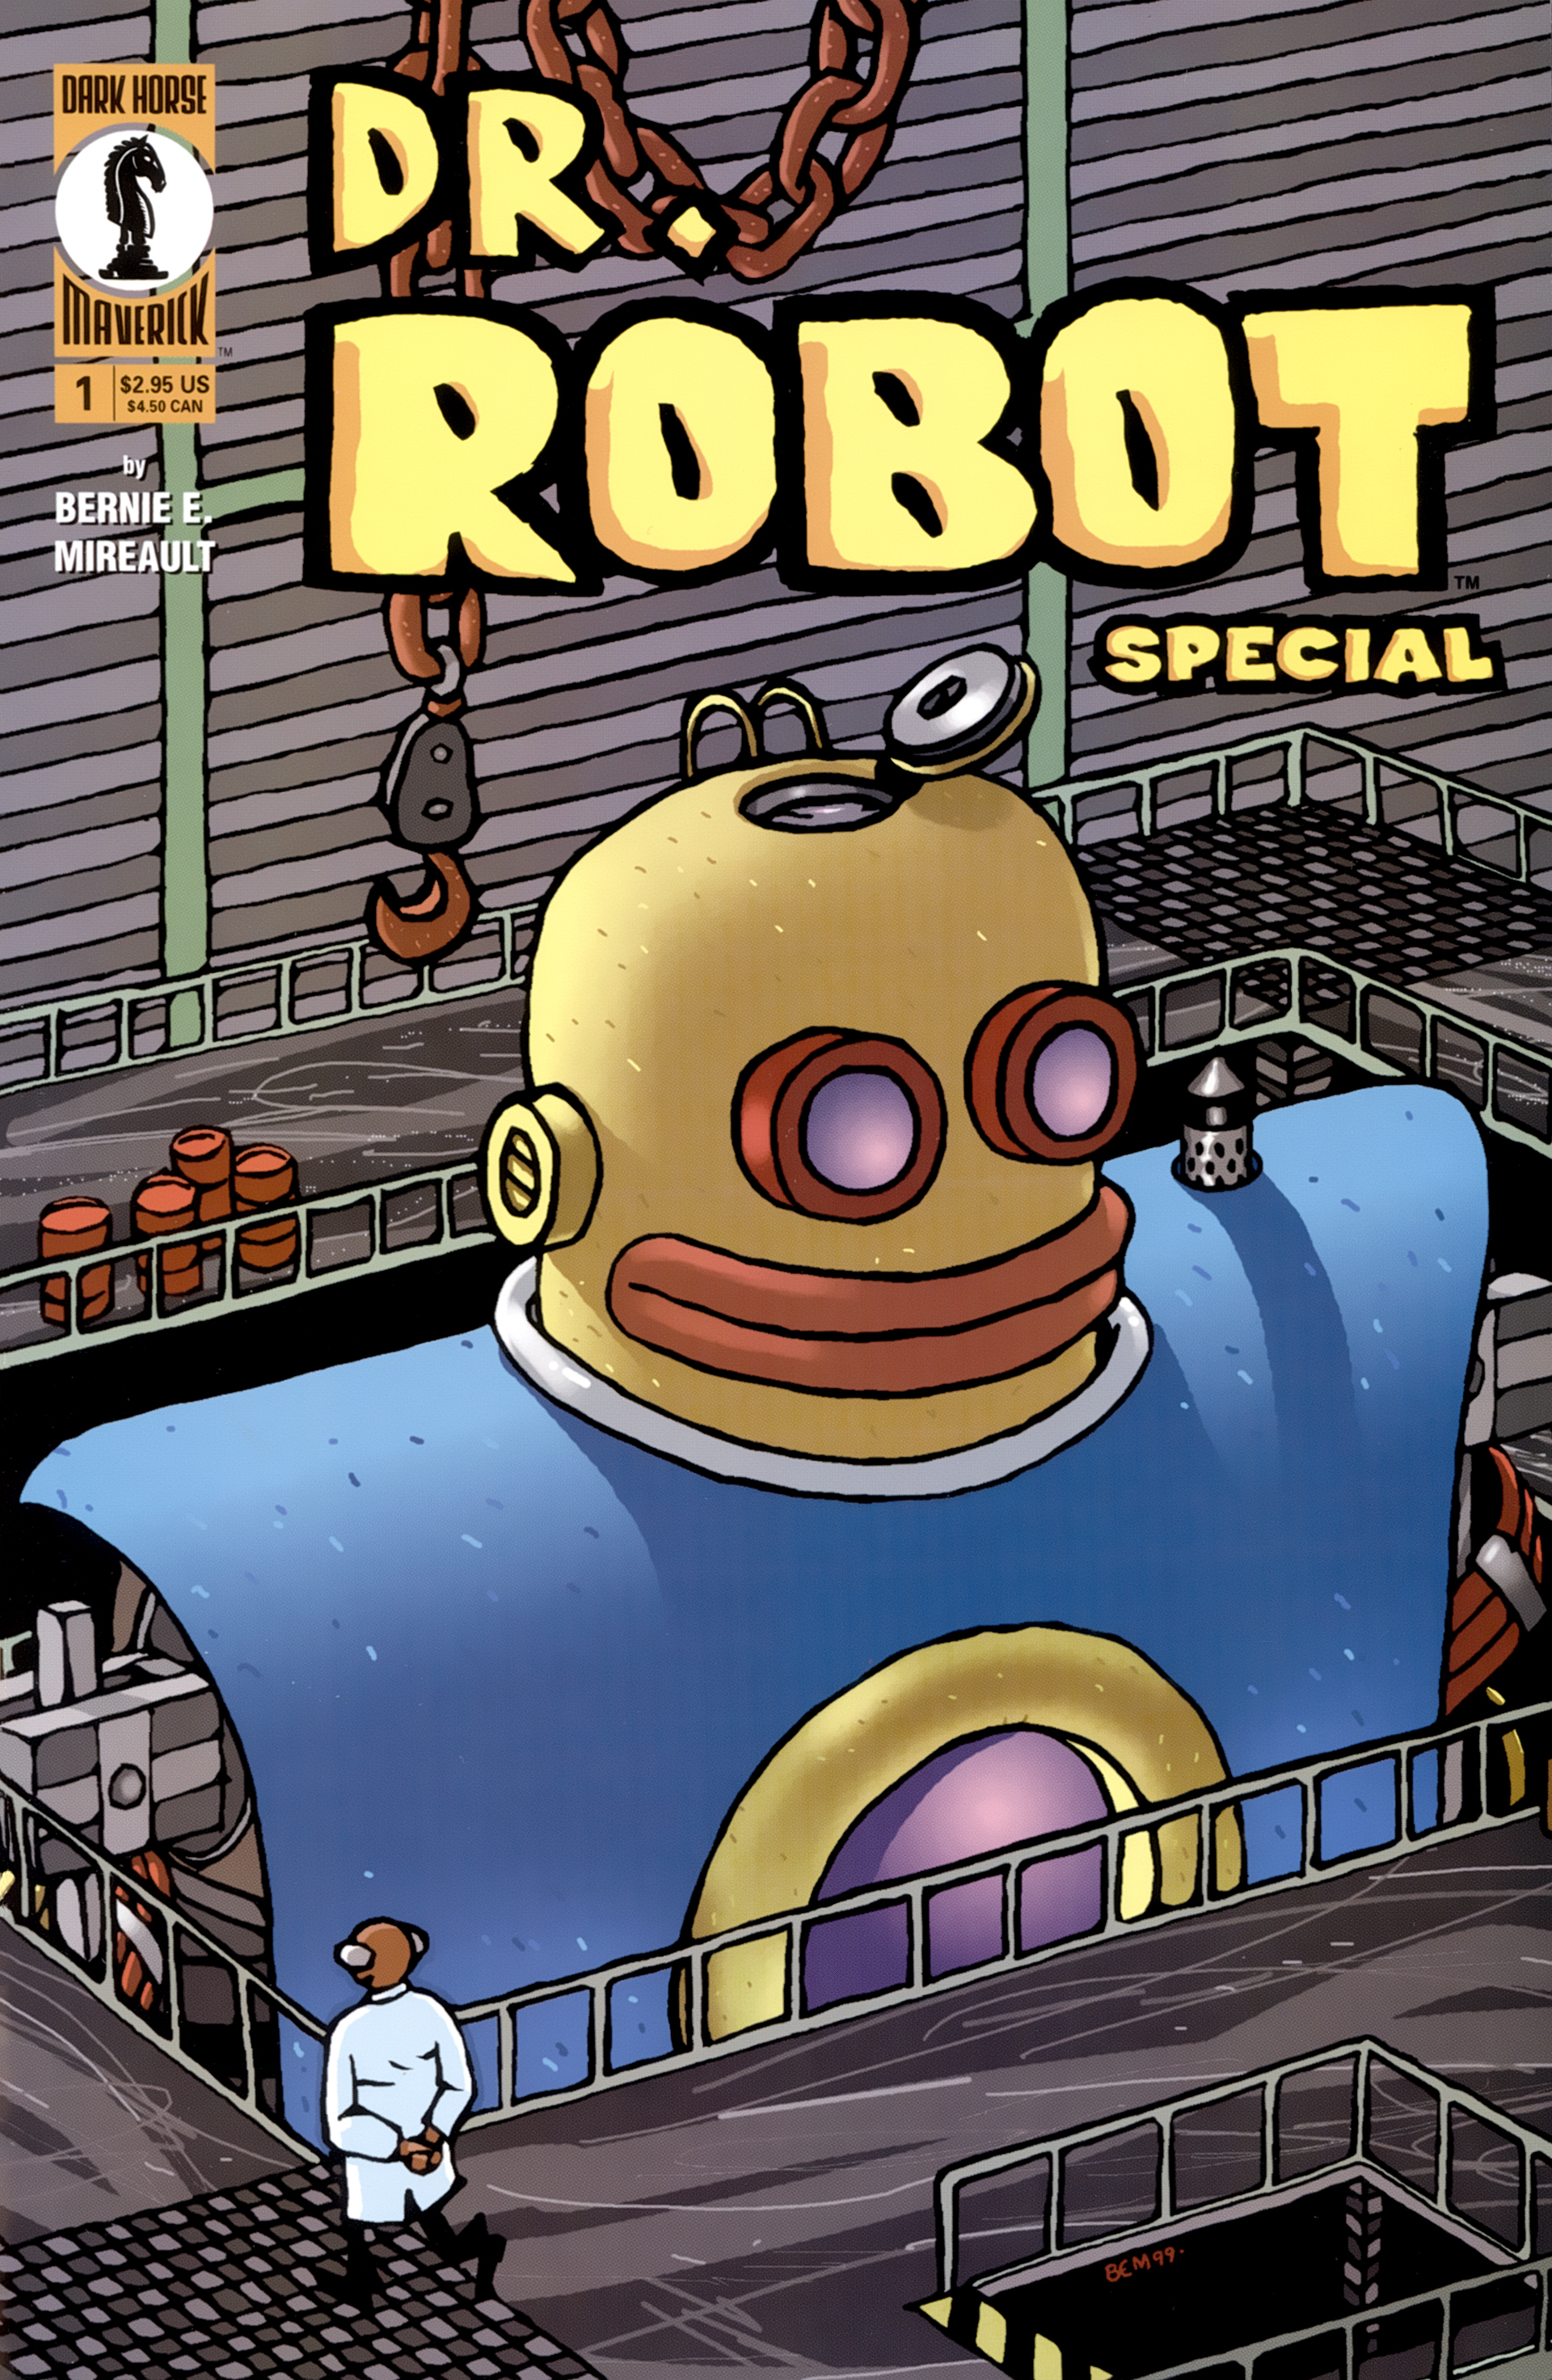 Read online Dr. Robot Special comic -  Issue # Full - 1